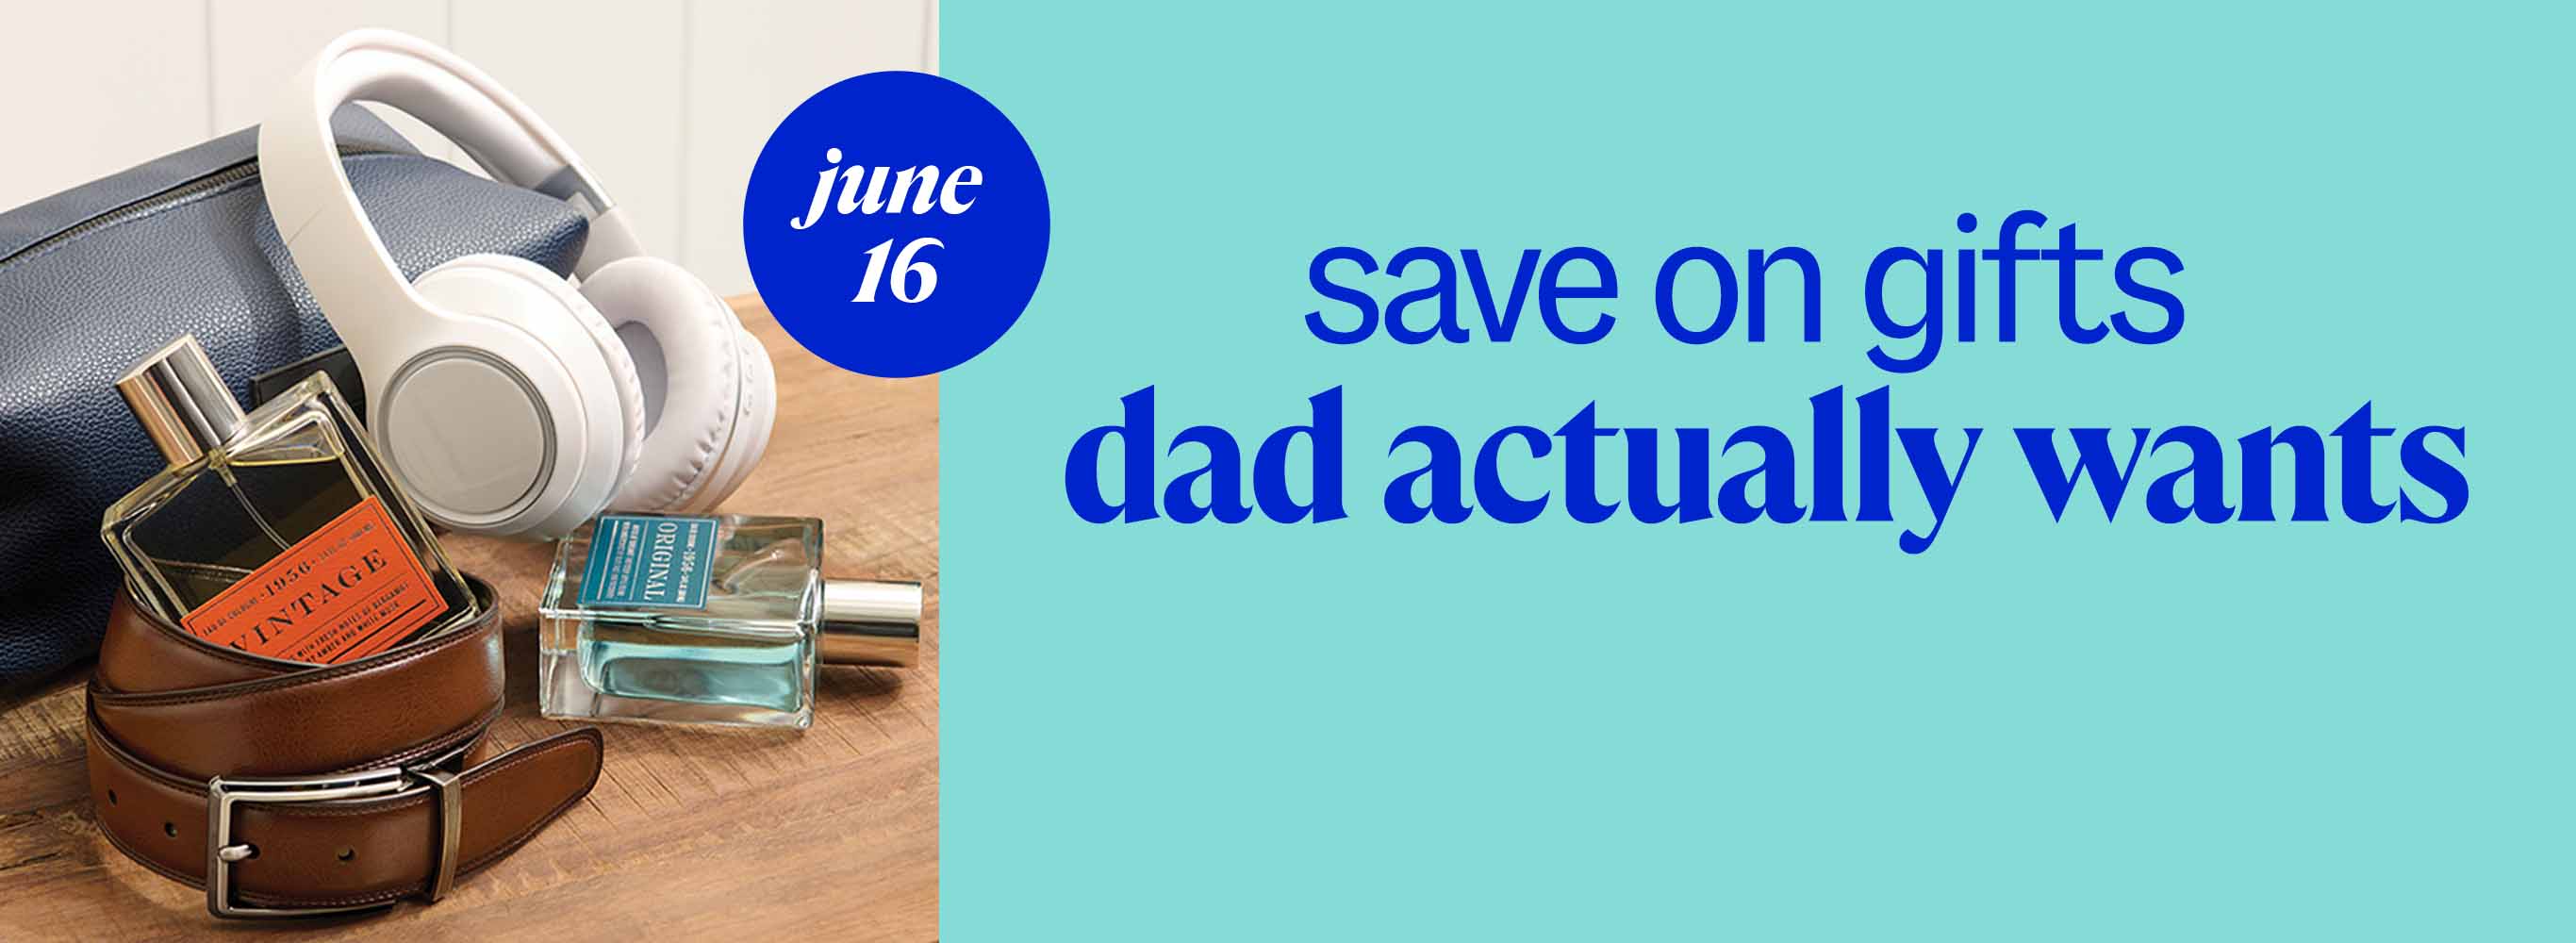 save on gifts dad actually wants. june 16.